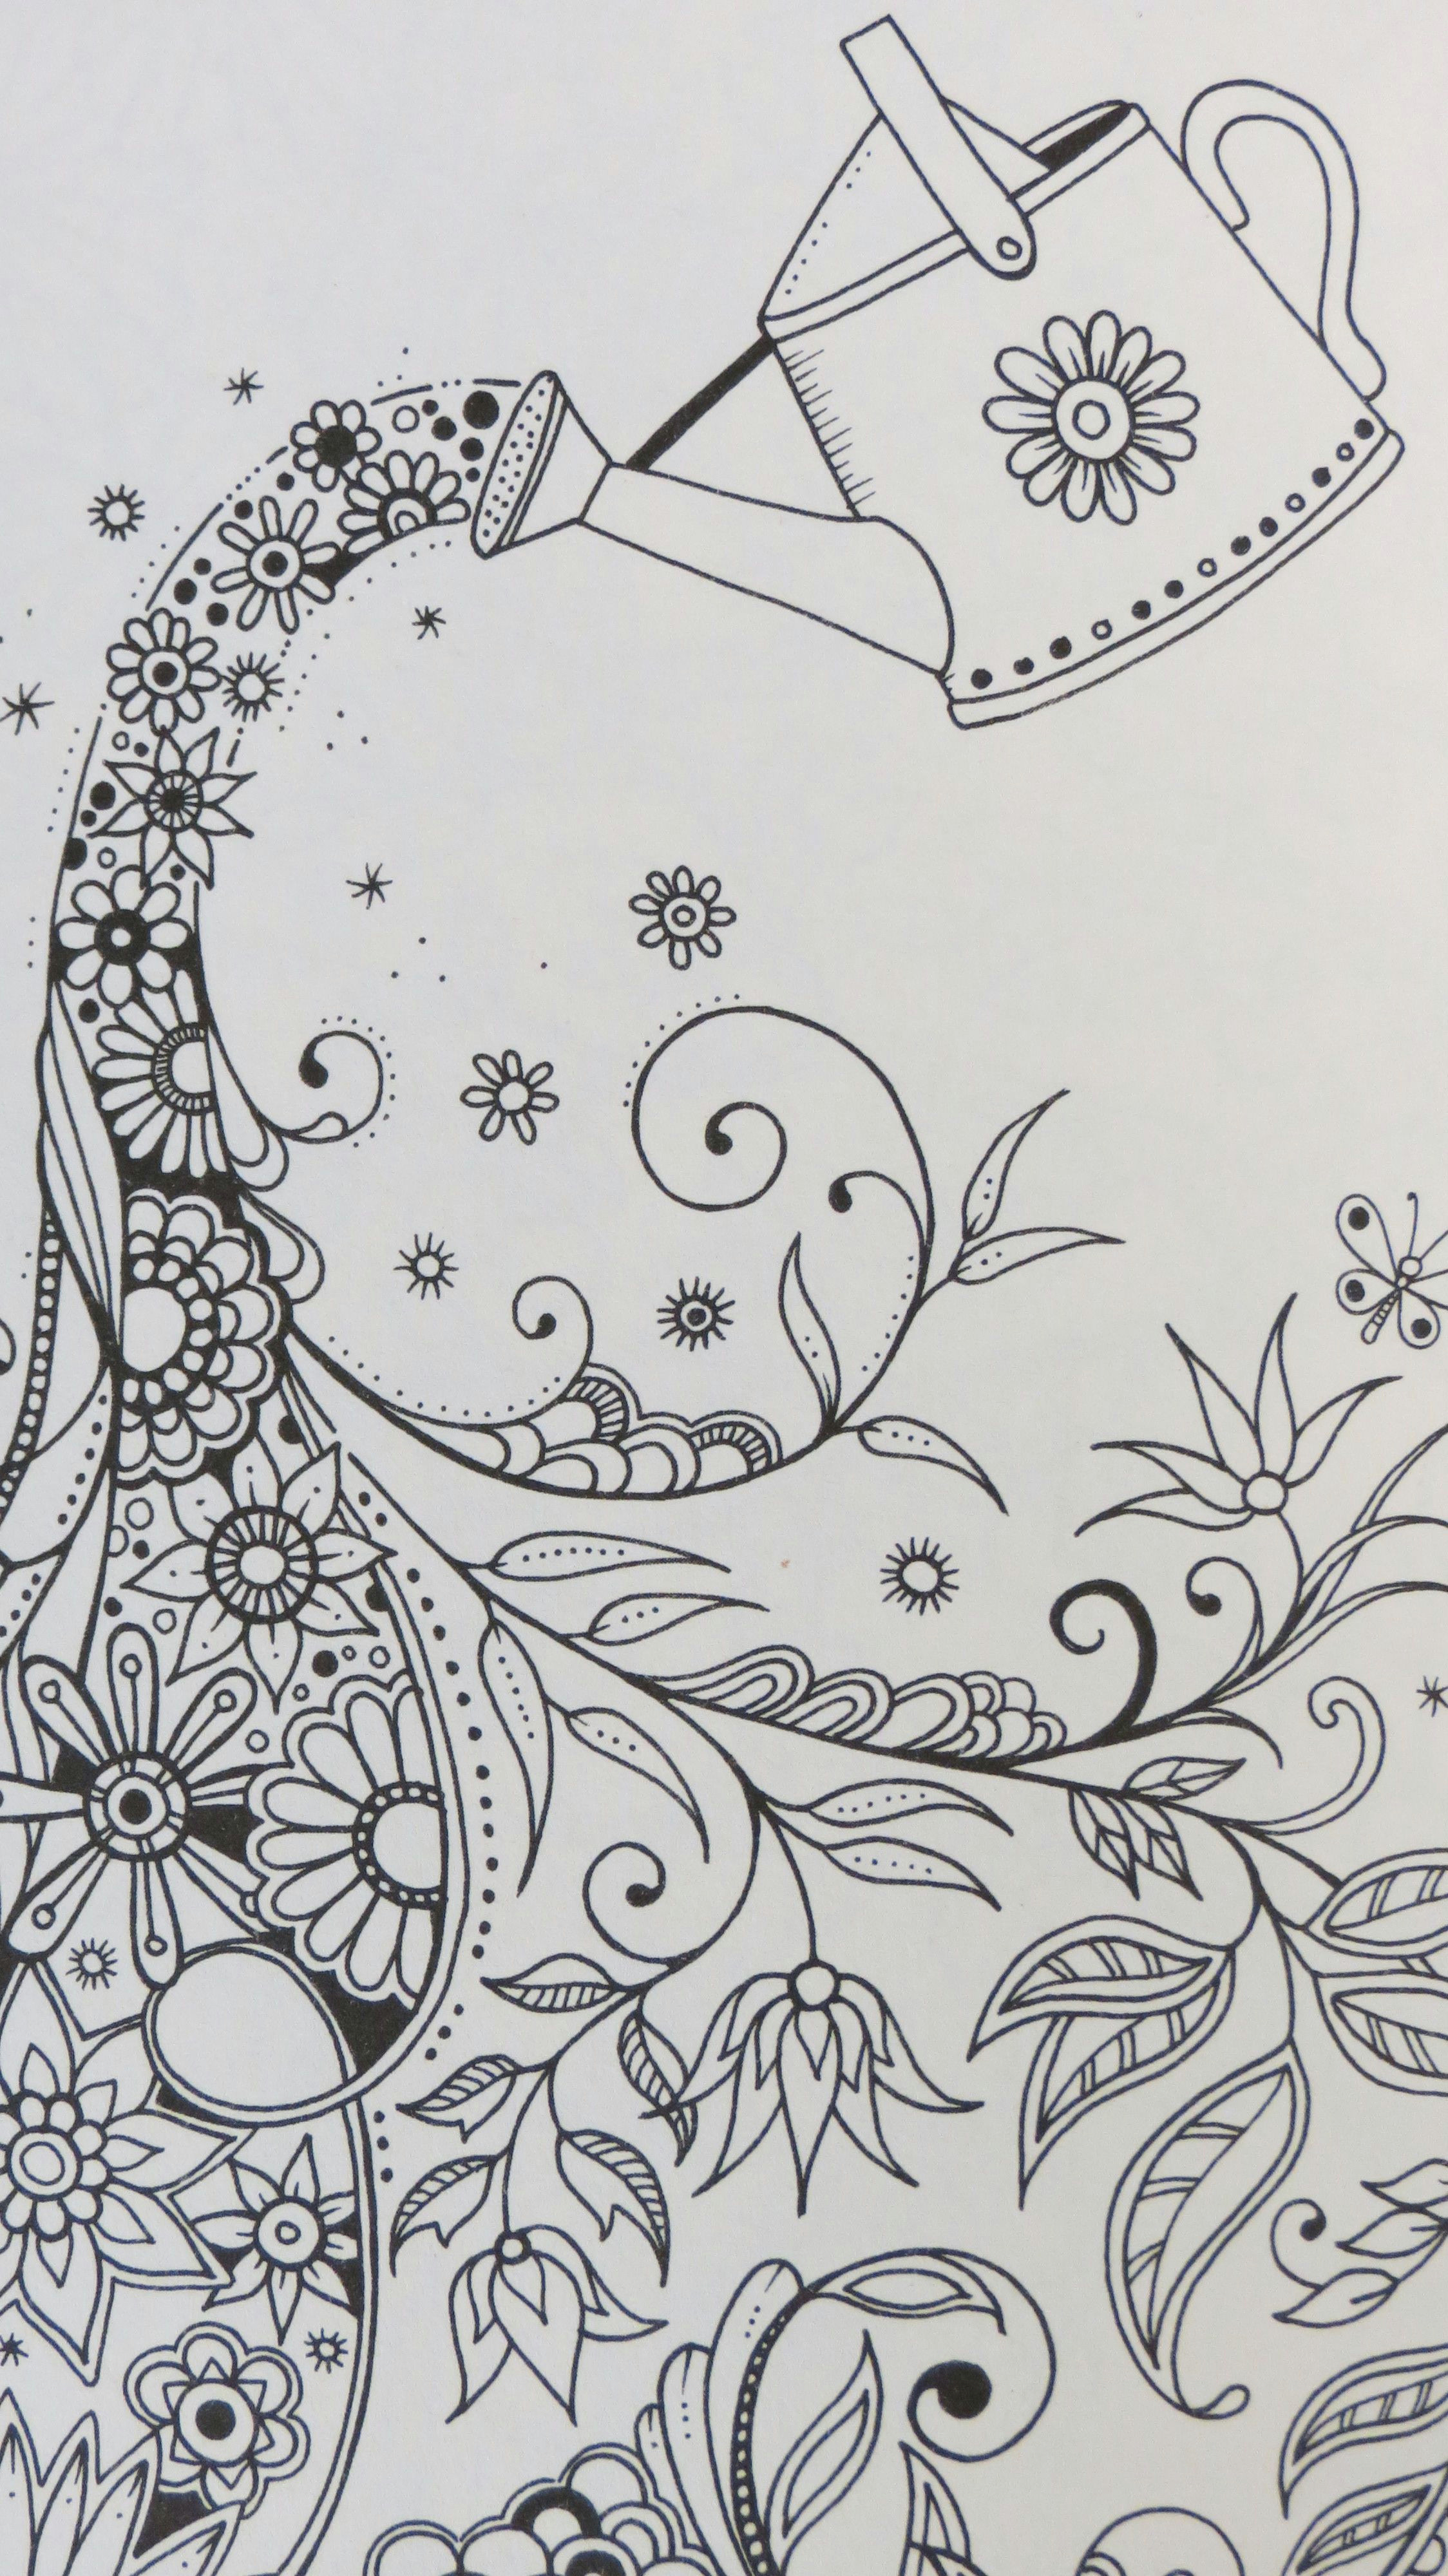 Drawing Of Flowers In the Garden Secret Garden Coloring Pages Pinterest Gardens Doodles and